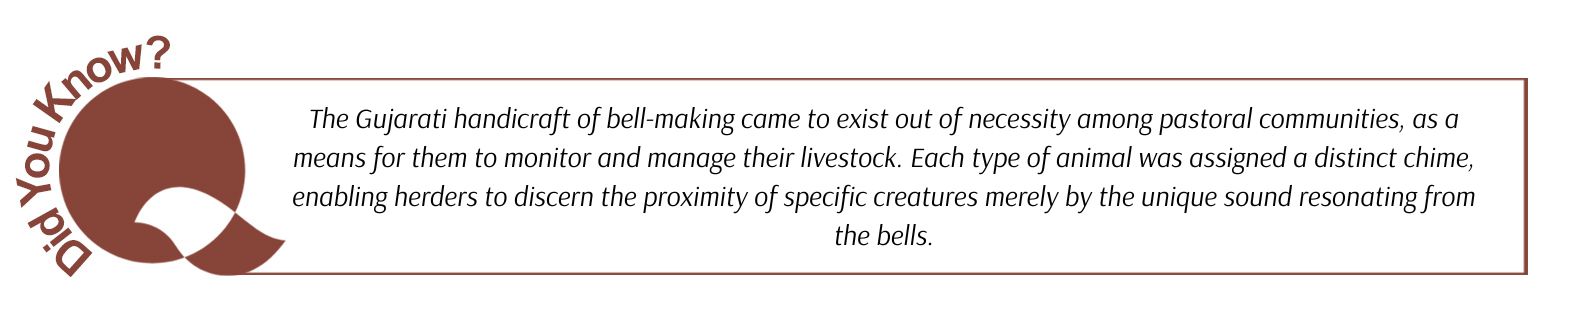 The Gujarati handicraft of bell-making came to exist out of necessity among pastoral communities, as a means for them to monitor and manage their livestock. Each type of animal was assigned a distinct chime, enabling herders to discern the proximity of specific creatures merely by the unique sound resonating from the bells.